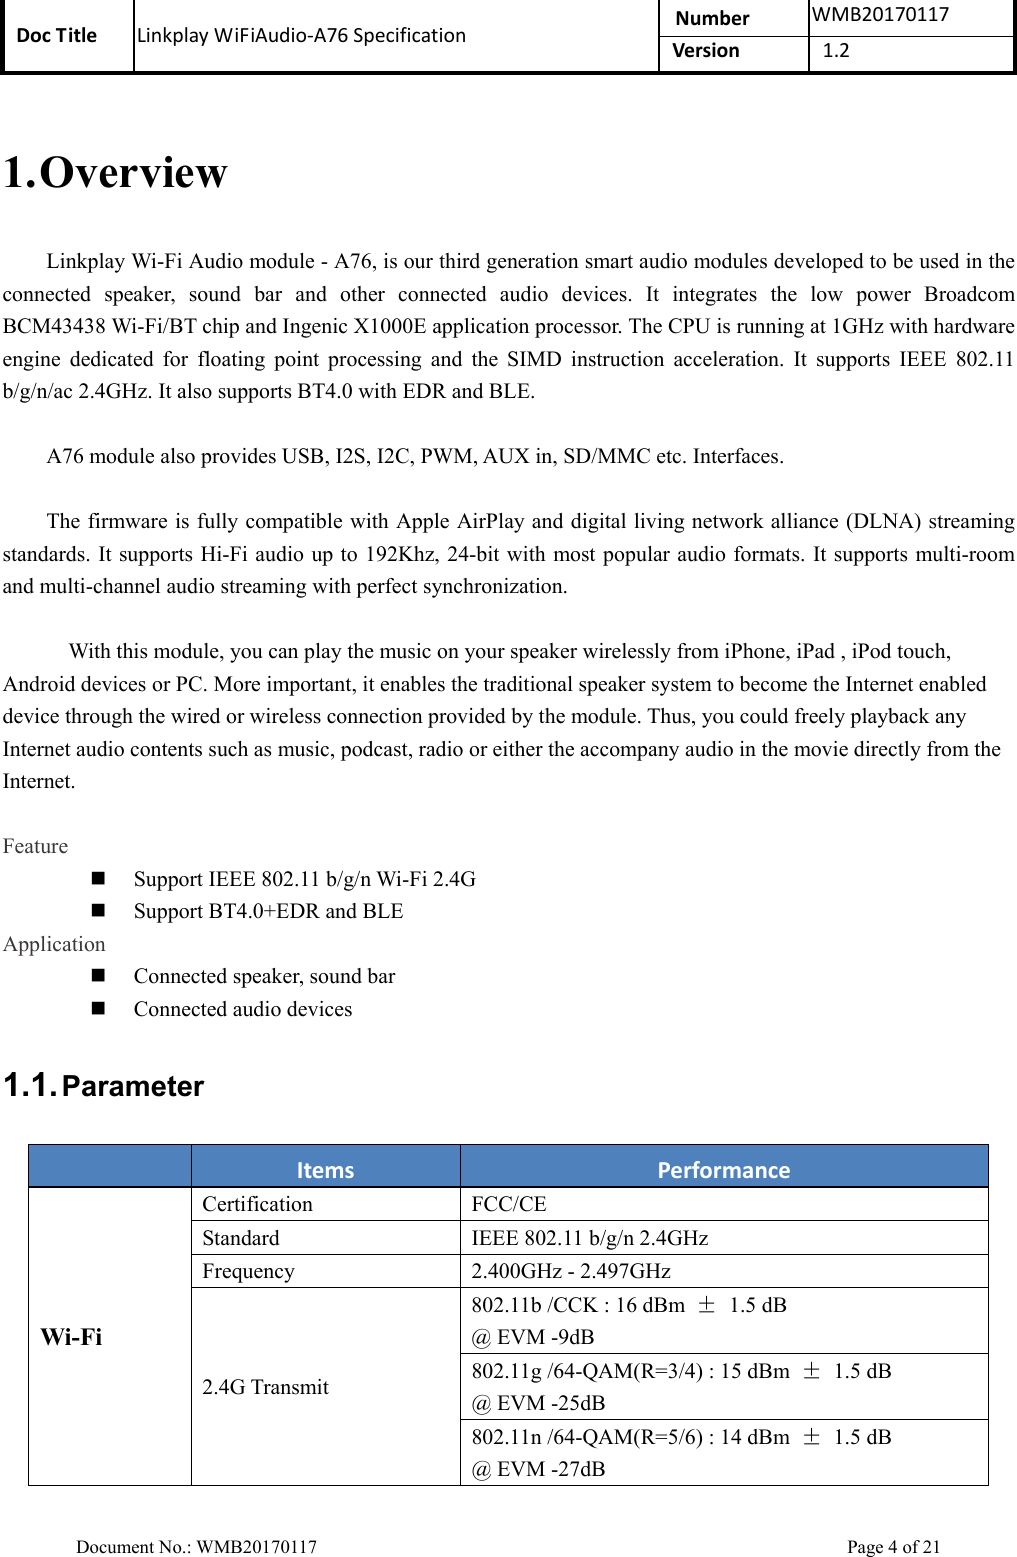 Doc Title  Linkplay WiFiAudio-A76 Specification  Number  WMB20170117Version  1.2  Document No.: WMB20170117    Page 4 of 21 1. Overview Linkplay Wi-Fi Audio module - A76, is our third generation smart audio modules developed to be used in the connected  speaker,  sound  bar  and  other  connected  audio  devices.  It  integrates  the  low  power  Broadcom BCM43438 Wi-Fi/BT chip and Ingenic X1000E application processor. The CPU is running at 1GHz with hardware engine  dedicated  for  floating  point  processing  and  the  SIMD  instruction  acceleration.  It  supports  IEEE  802.11 b/g/n/ac 2.4GHz. It also supports BT4.0 with EDR and BLE.   A76 module also provides USB, I2S, I2C, PWM, AUX in, SD/MMC etc. Interfaces.  The firmware is fully compatible with Apple AirPlay and digital living network alliance (DLNA) streaming standards. It supports Hi-Fi audio up to 192Khz, 24-bit with most popular audio formats. It supports multi-room and multi-channel audio streaming with perfect synchronization.         With this module, you can play the music on your speaker wirelessly from iPhone, iPad , iPod touch, Android devices or PC. More important, it enables the traditional speaker system to become the Internet enabled device through the wired or wireless connection provided by the module. Thus, you could freely playback any Internet audio contents such as music, podcast, radio or either the accompany audio in the movie directly from the Internet.    Feature  Support IEEE 802.11 b/g/n Wi-Fi 2.4G  Support BT4.0+EDR and BLE Application  Connected speaker, sound bar  Connected audio devices 1.1. Parameter  Items  Performance Wi-Fi Certification  FCC/CE Standard  IEEE 802.11 b/g/n 2.4GHz Frequency  2.400GHz - 2.497GHz 2.4G Transmit 802.11b /CCK : 16 dBm  ±  1.5 dB   @ EVM -9dB 802.11g /64-QAM(R=3/4) : 15 dBm  ± 1.5 dB @ EVM -25dB 802.11n /64-QAM(R=5/6) : 14 dBm  ± 1.5 dB  @ EVM -27dB 